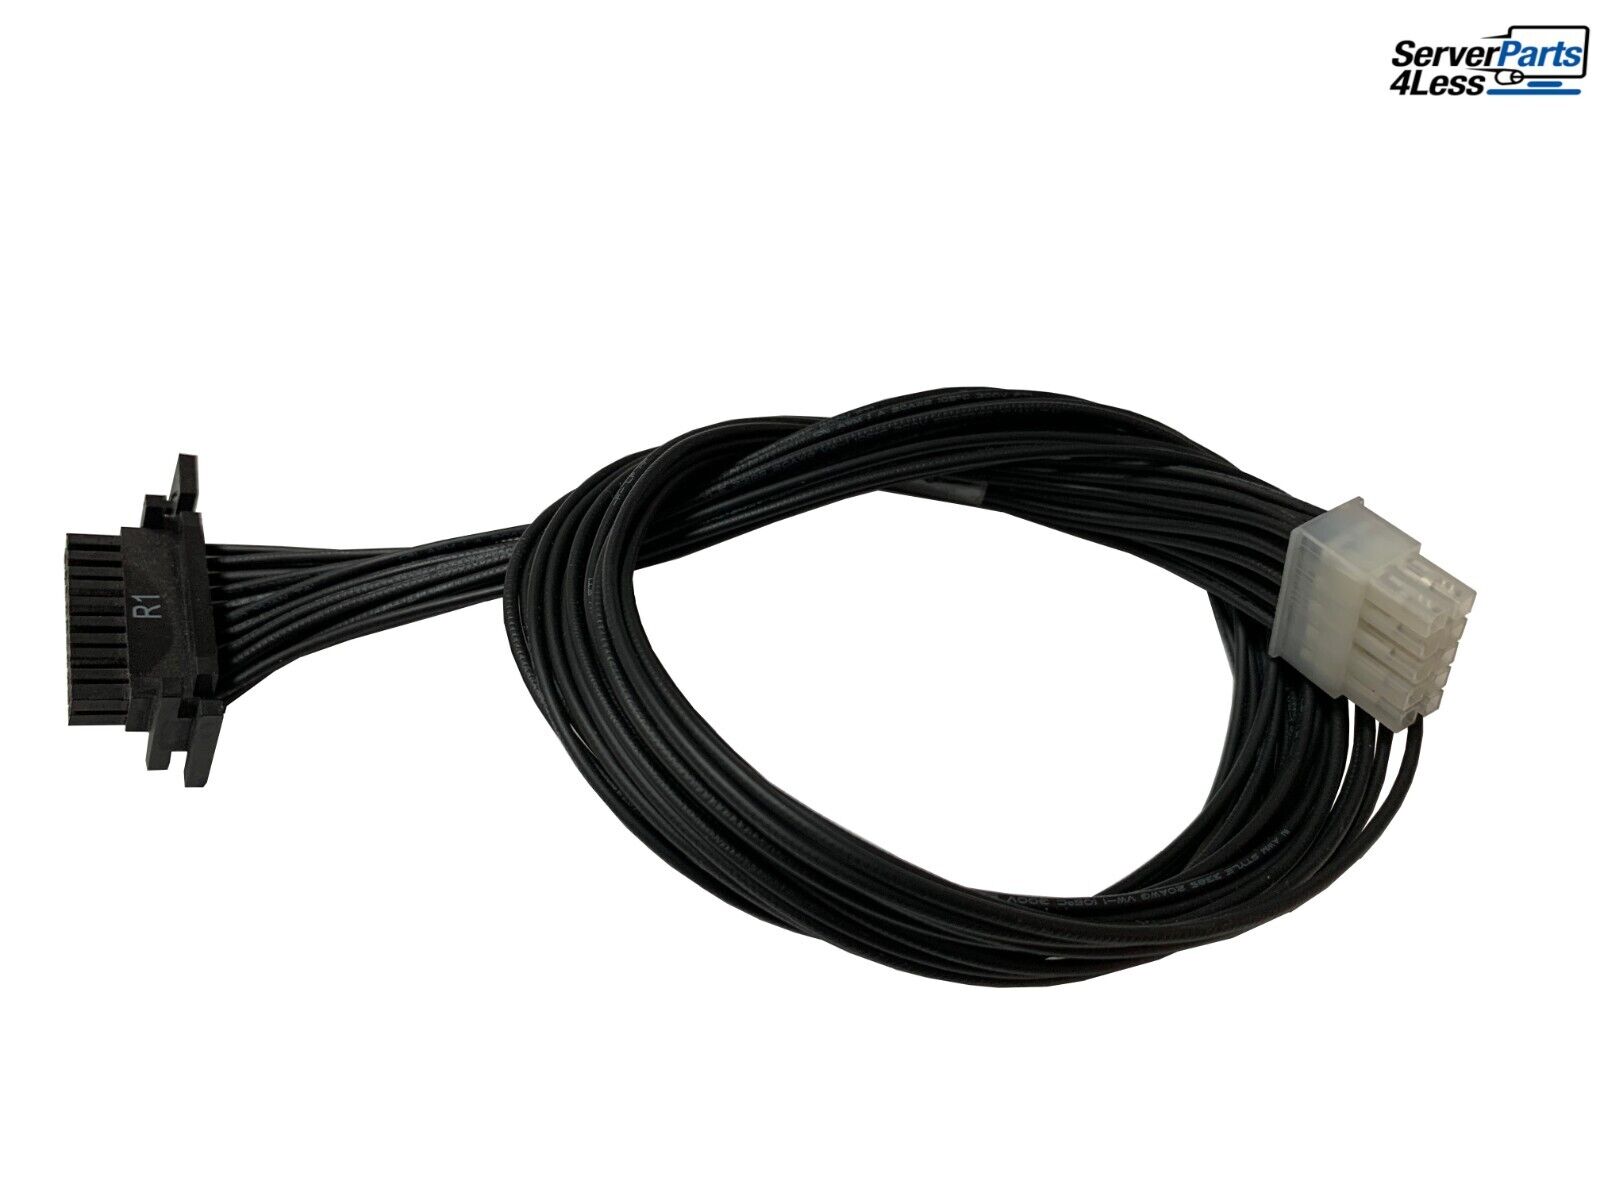 744202-001 HP 2ND CPU RISER POWER CABLE FOR HP Z640 WORKSTATION 10 PIN-20 PIN